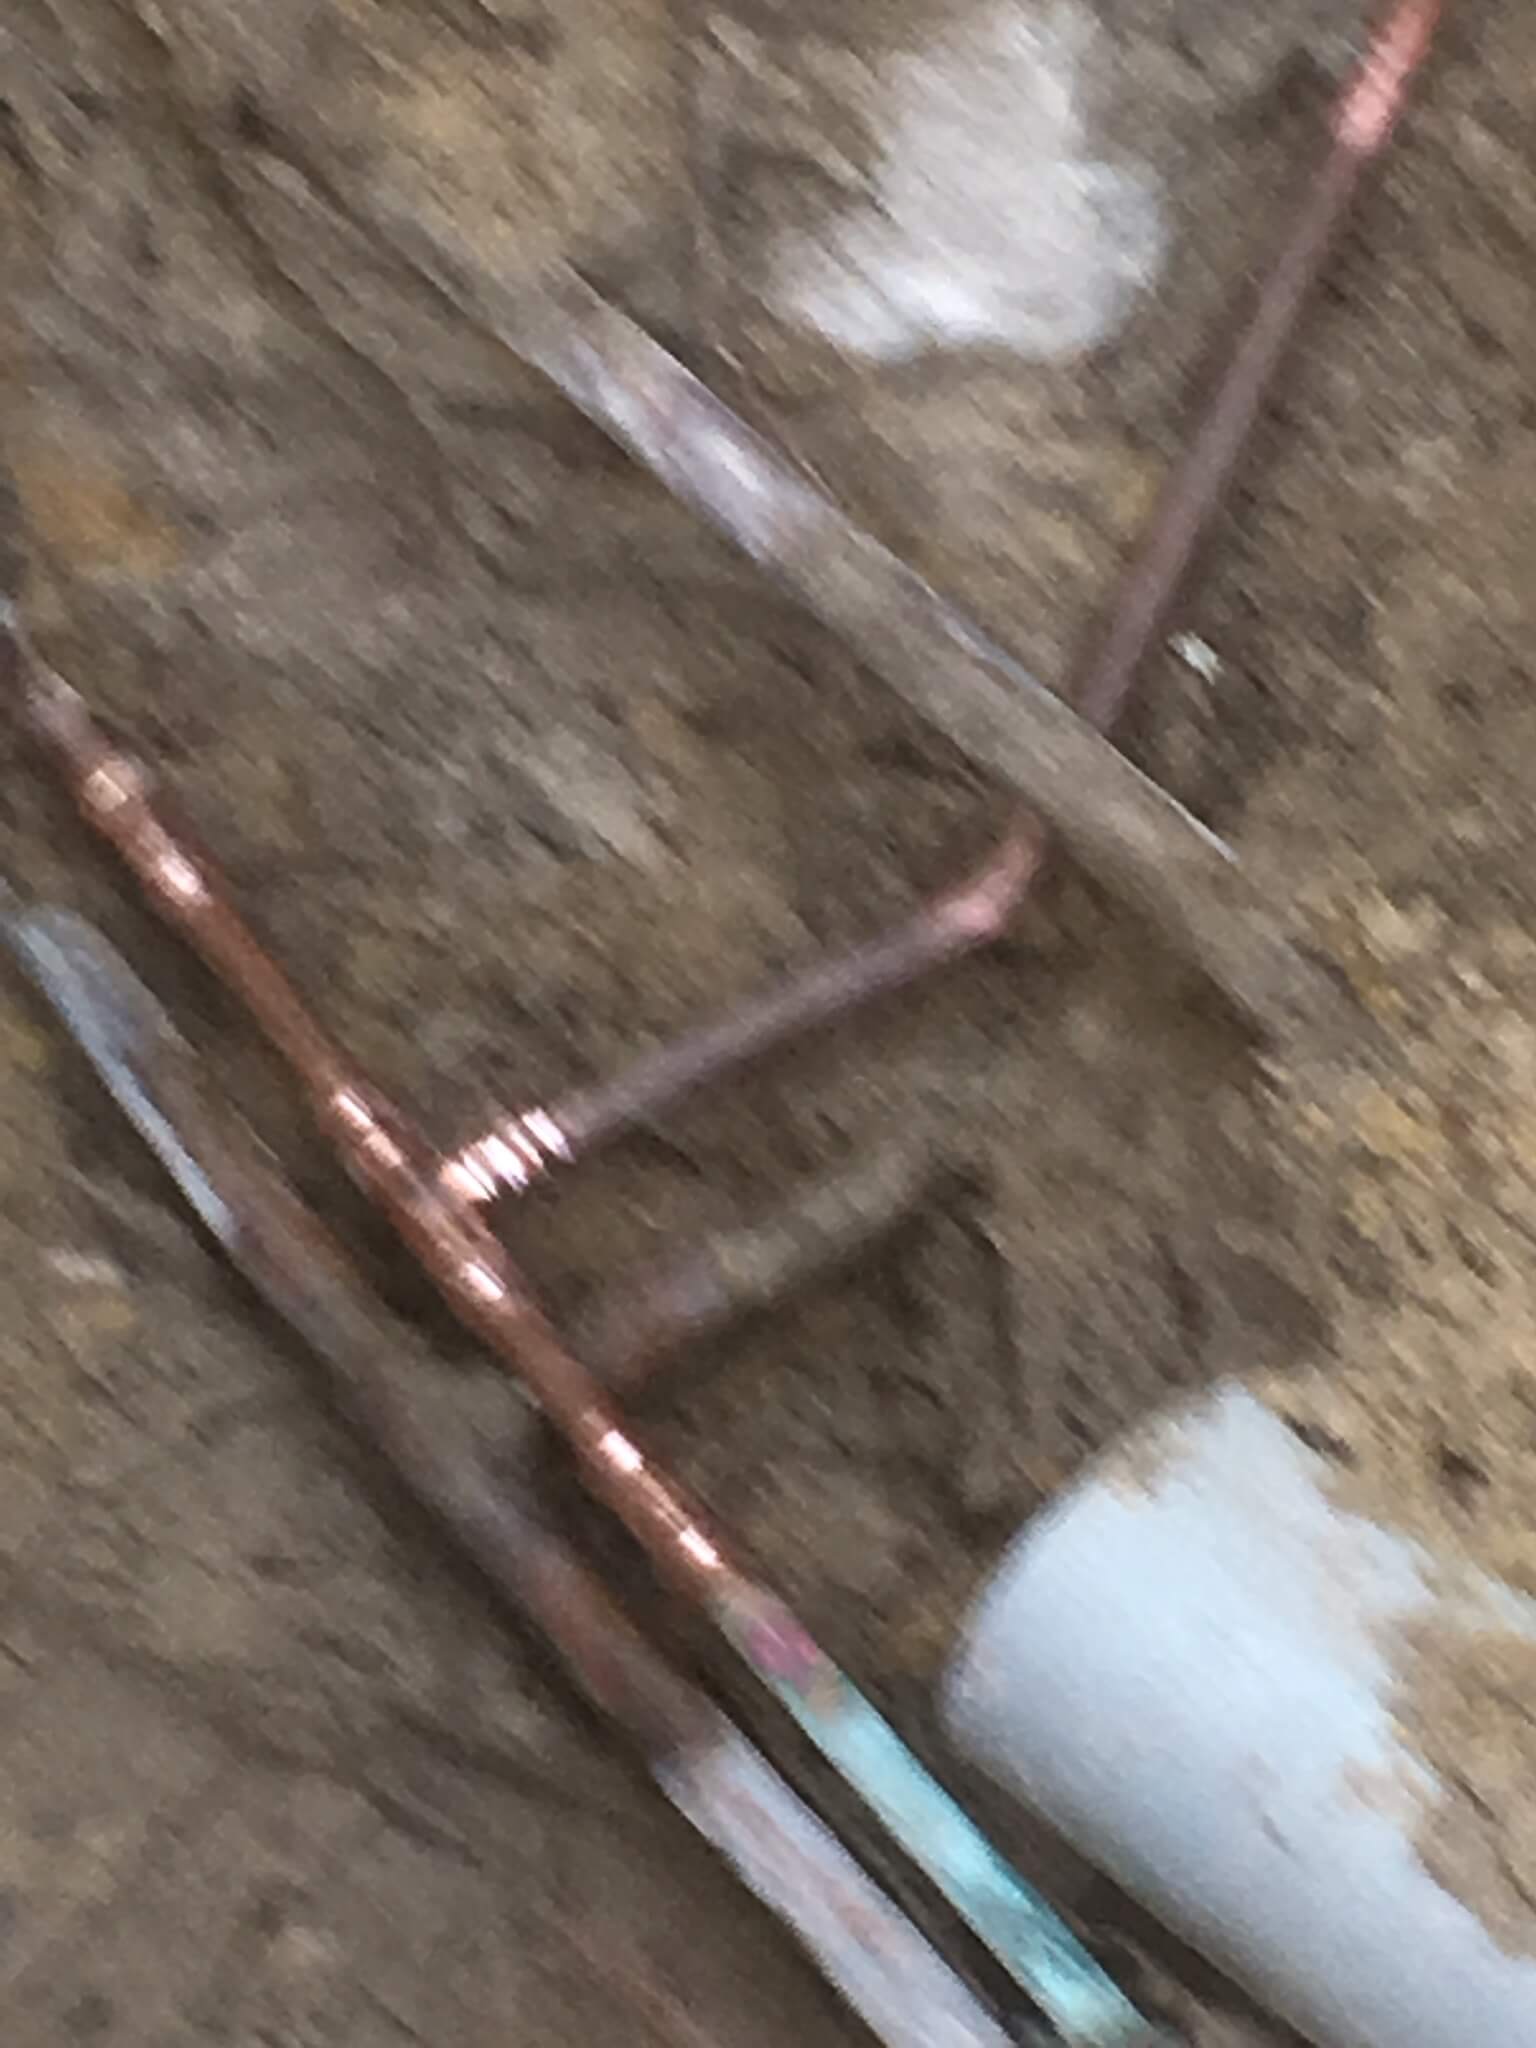 Everyday Plumbers Residential Corroded Pipes Repair - Corroded Pipe Joint Replacements 2051